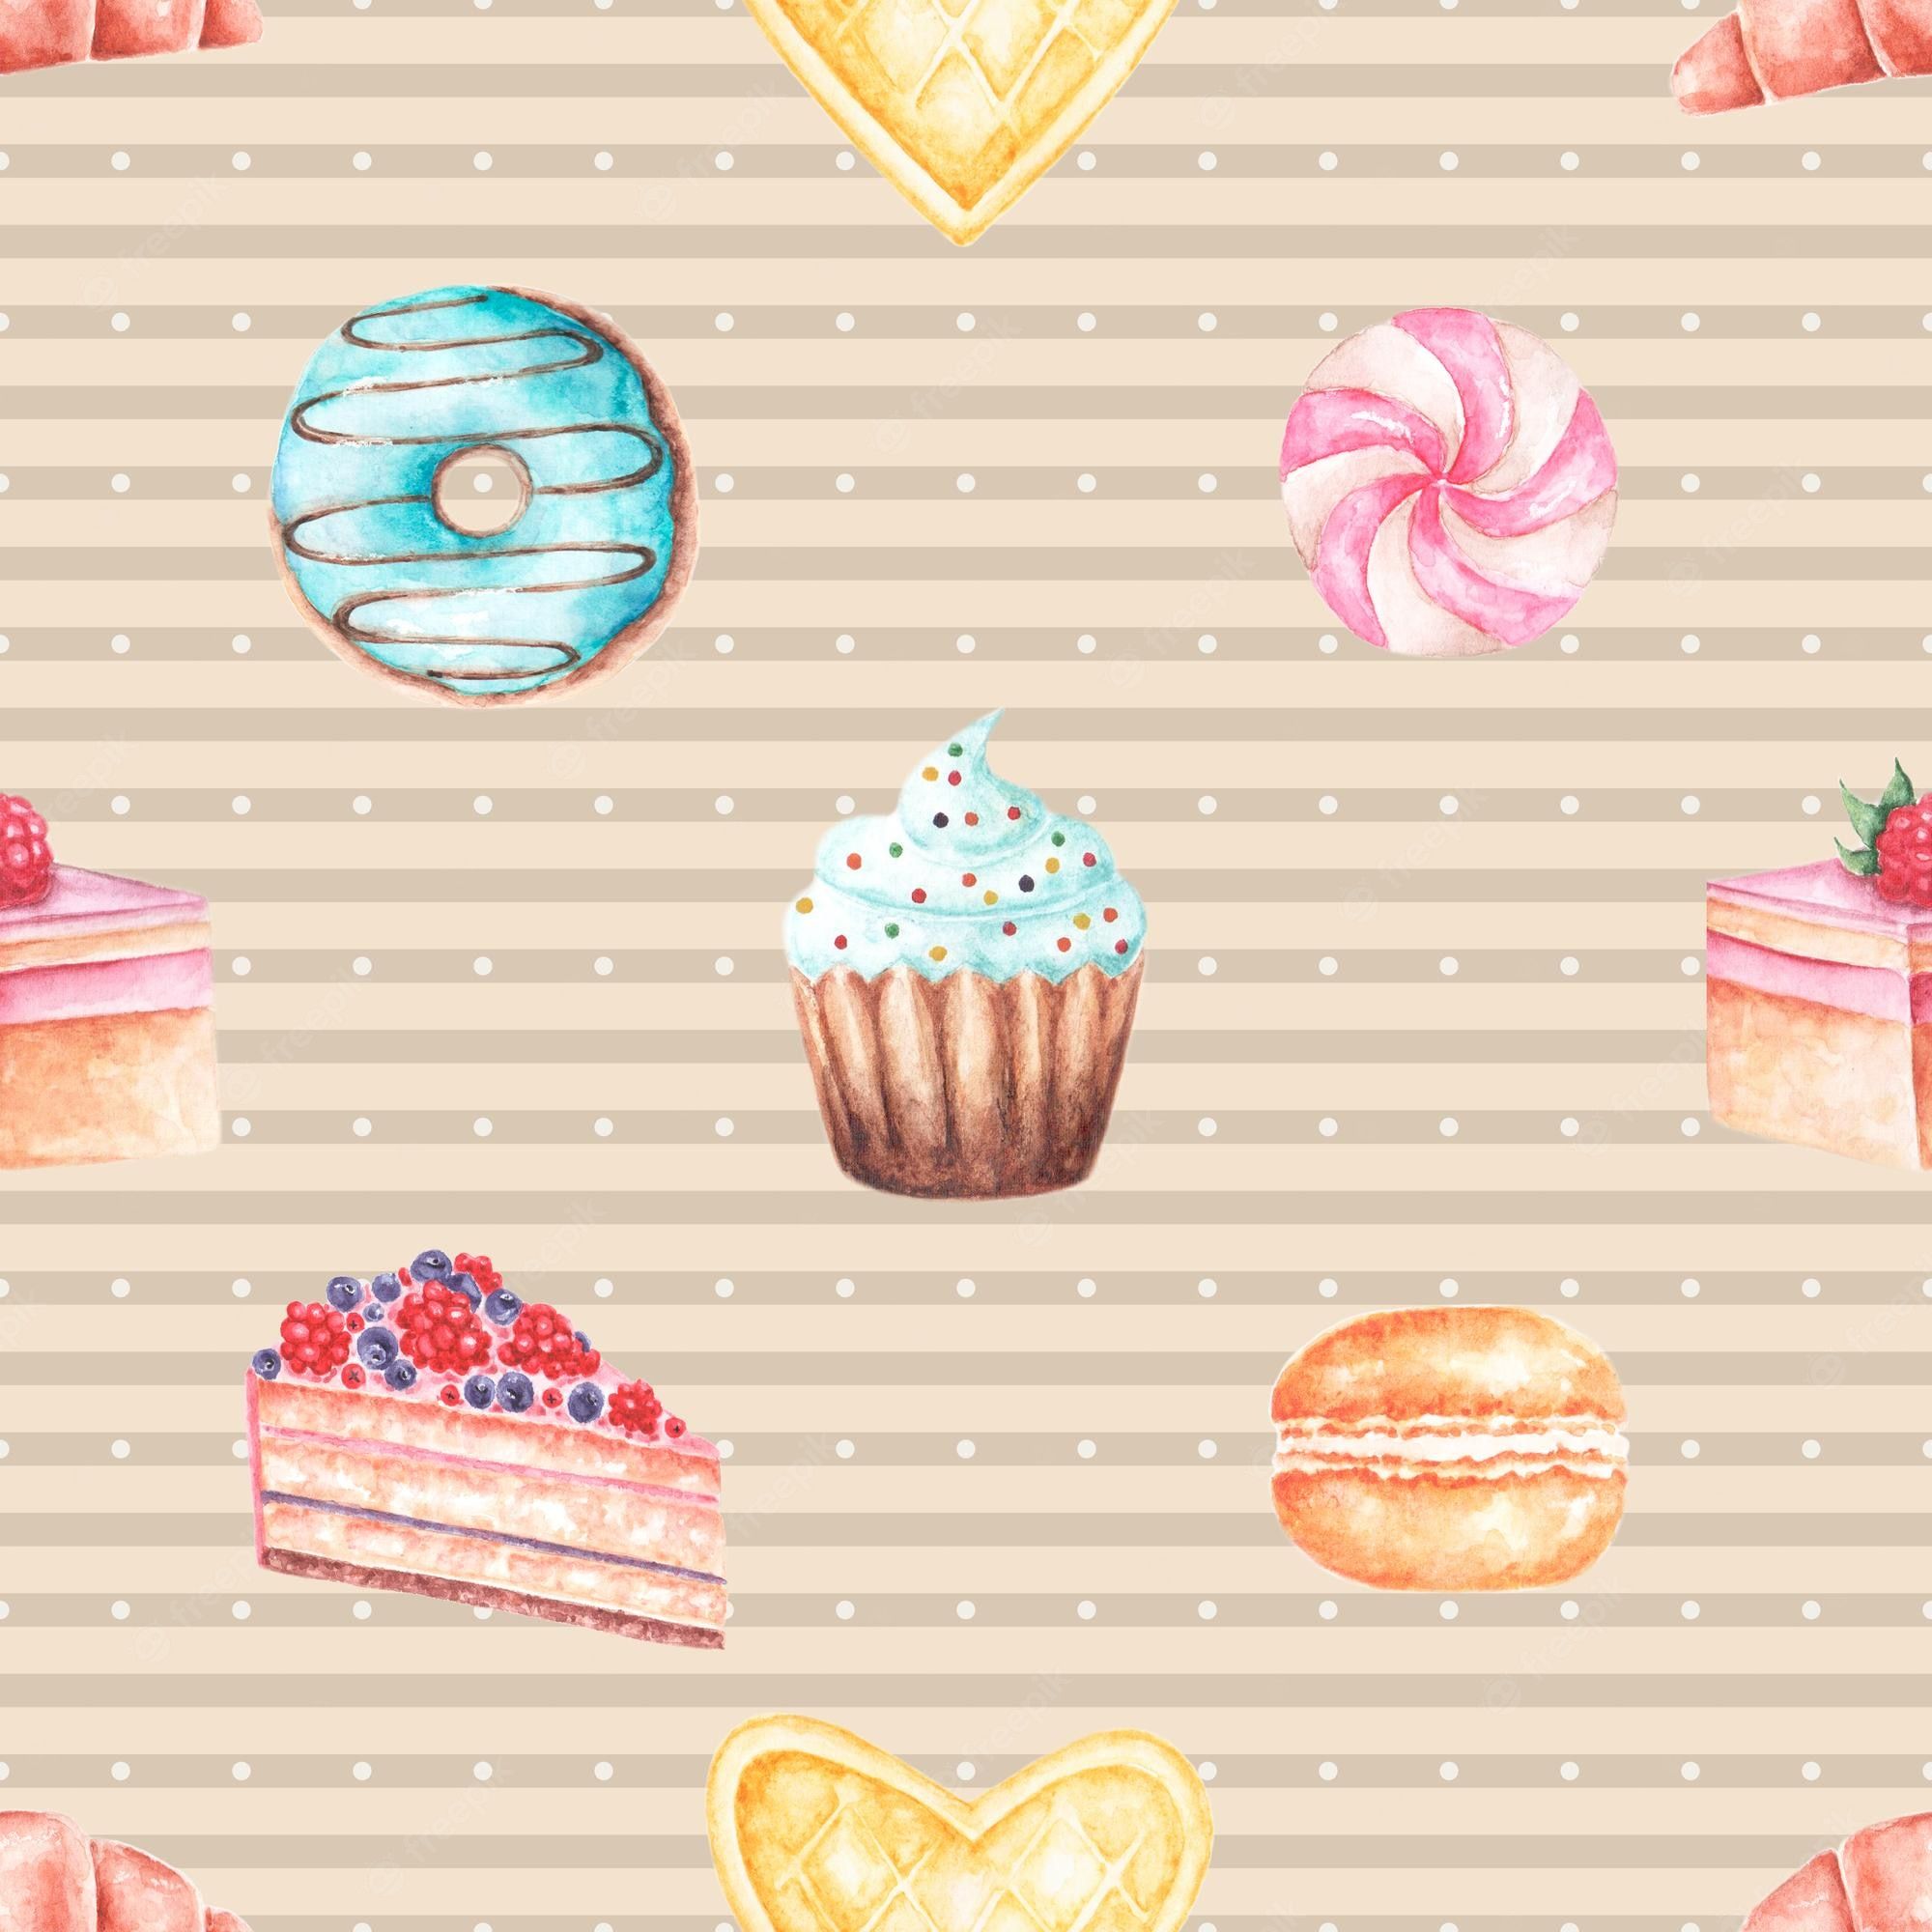 Watercolor illustration of a pattern with cakes and donuts - Cake